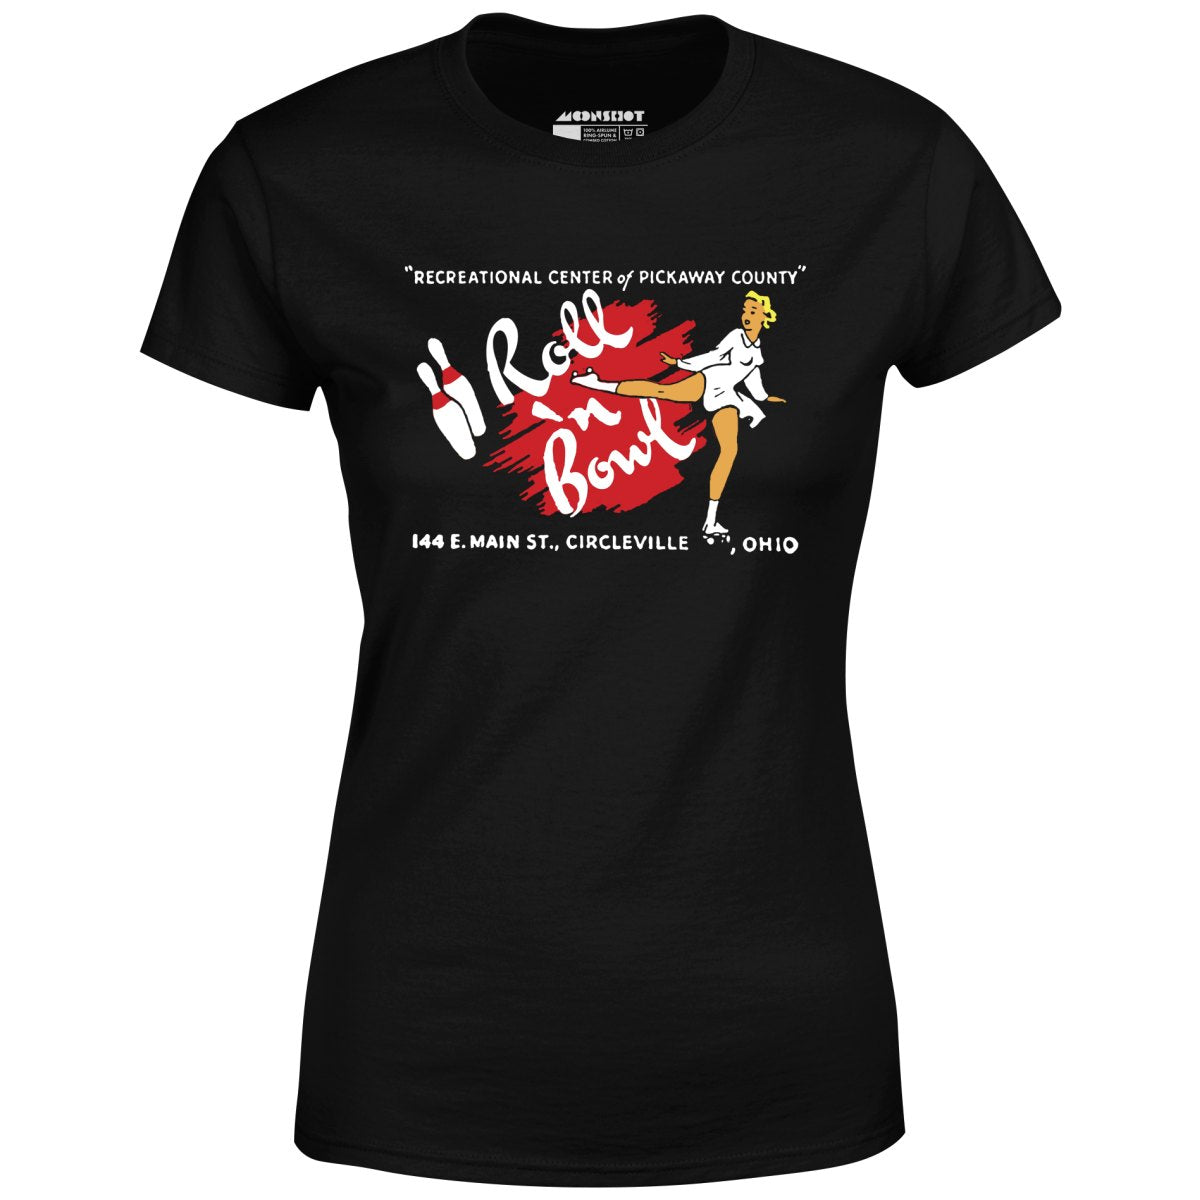 Roll 'n Bowl - Circleville, OH - Vintage Bowling Alley - Women's T-Shirt